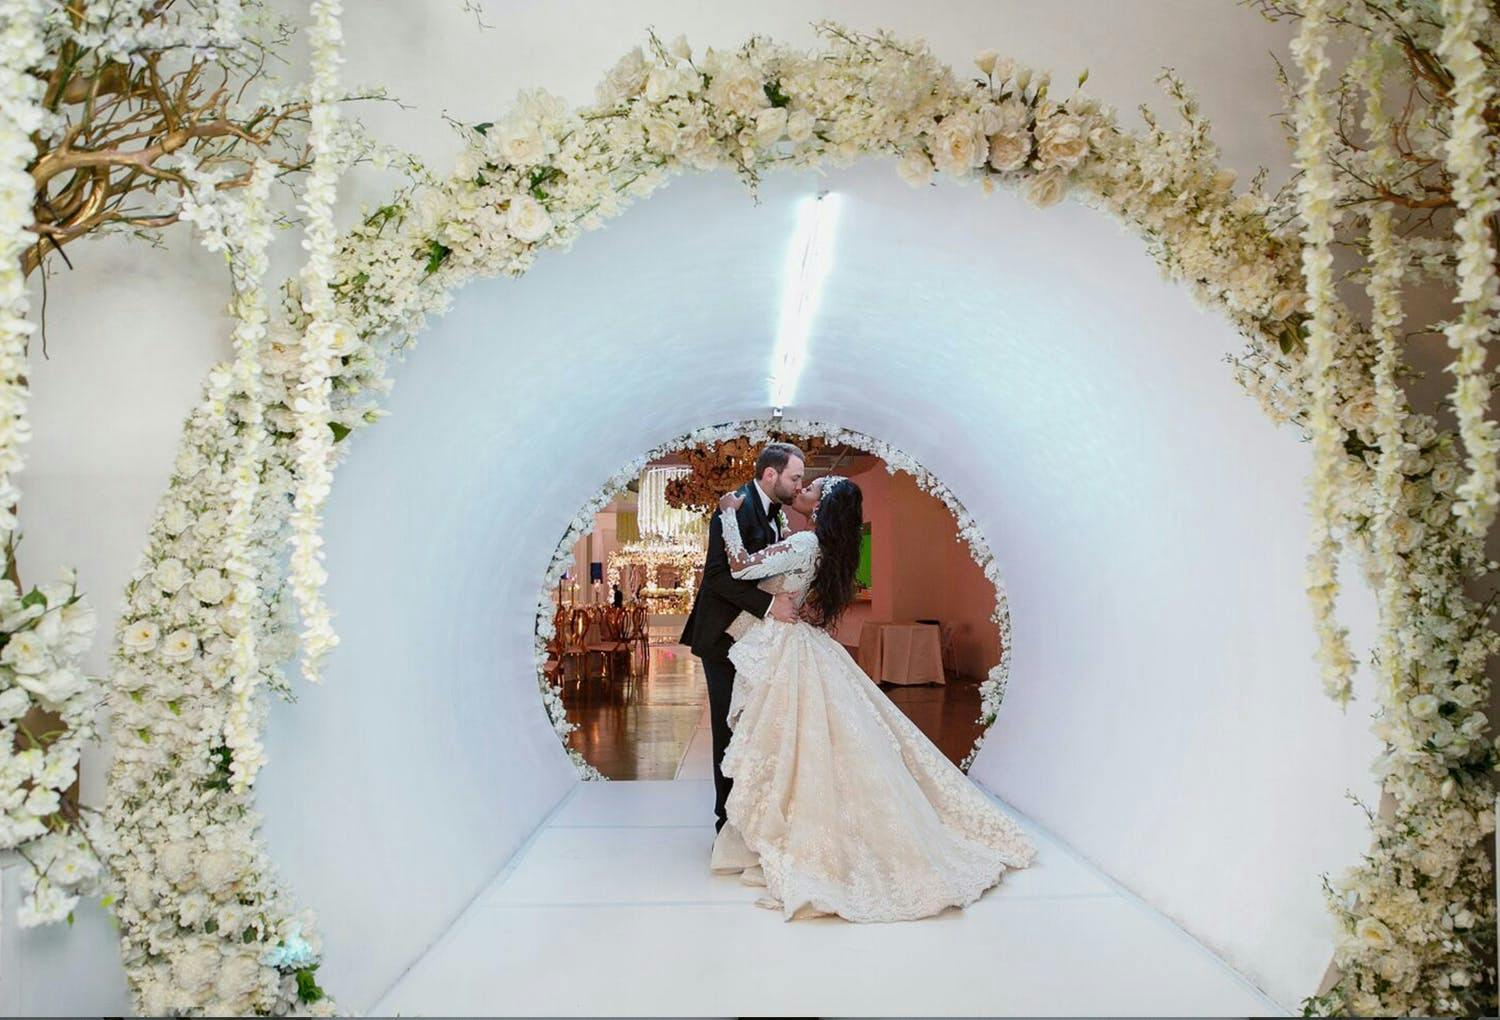 Bride and groom Kiss in Sleek White Tunnel Wedding Entrance With White Flowers | PartySlate